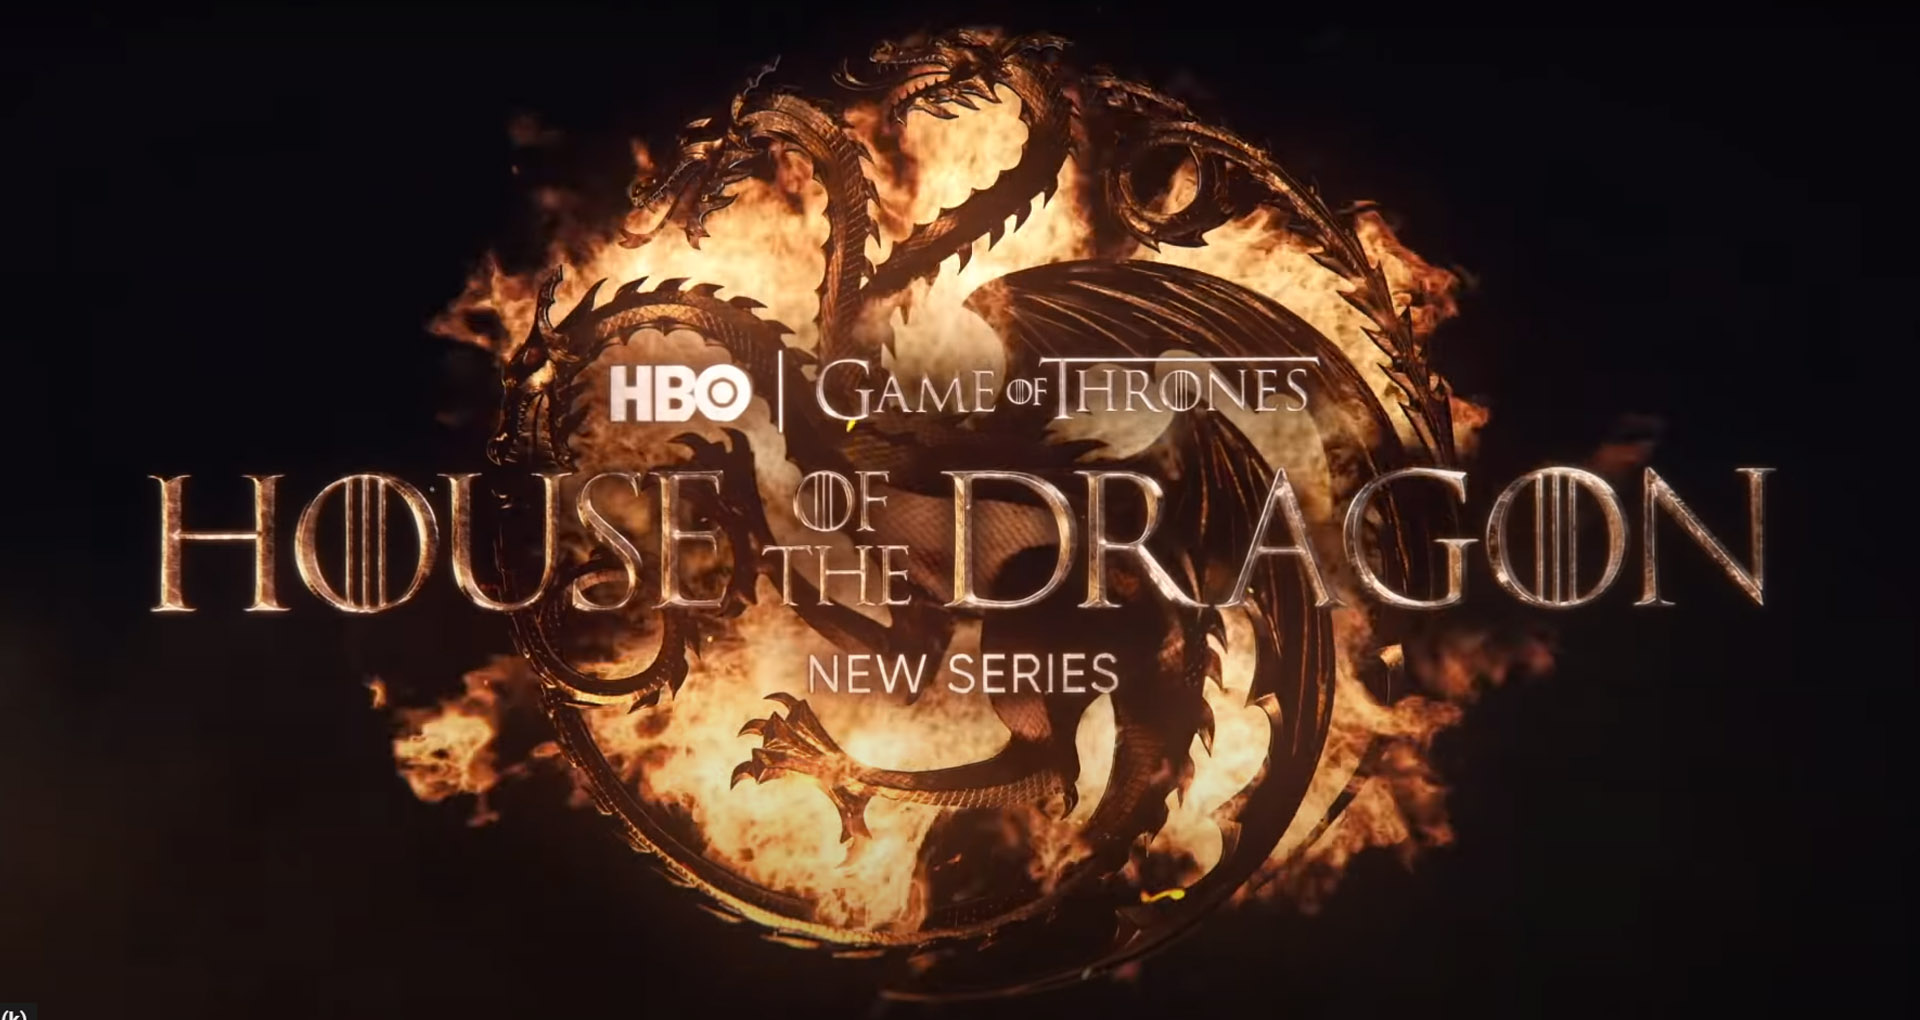 House of the Dragon by HBO key visual poster